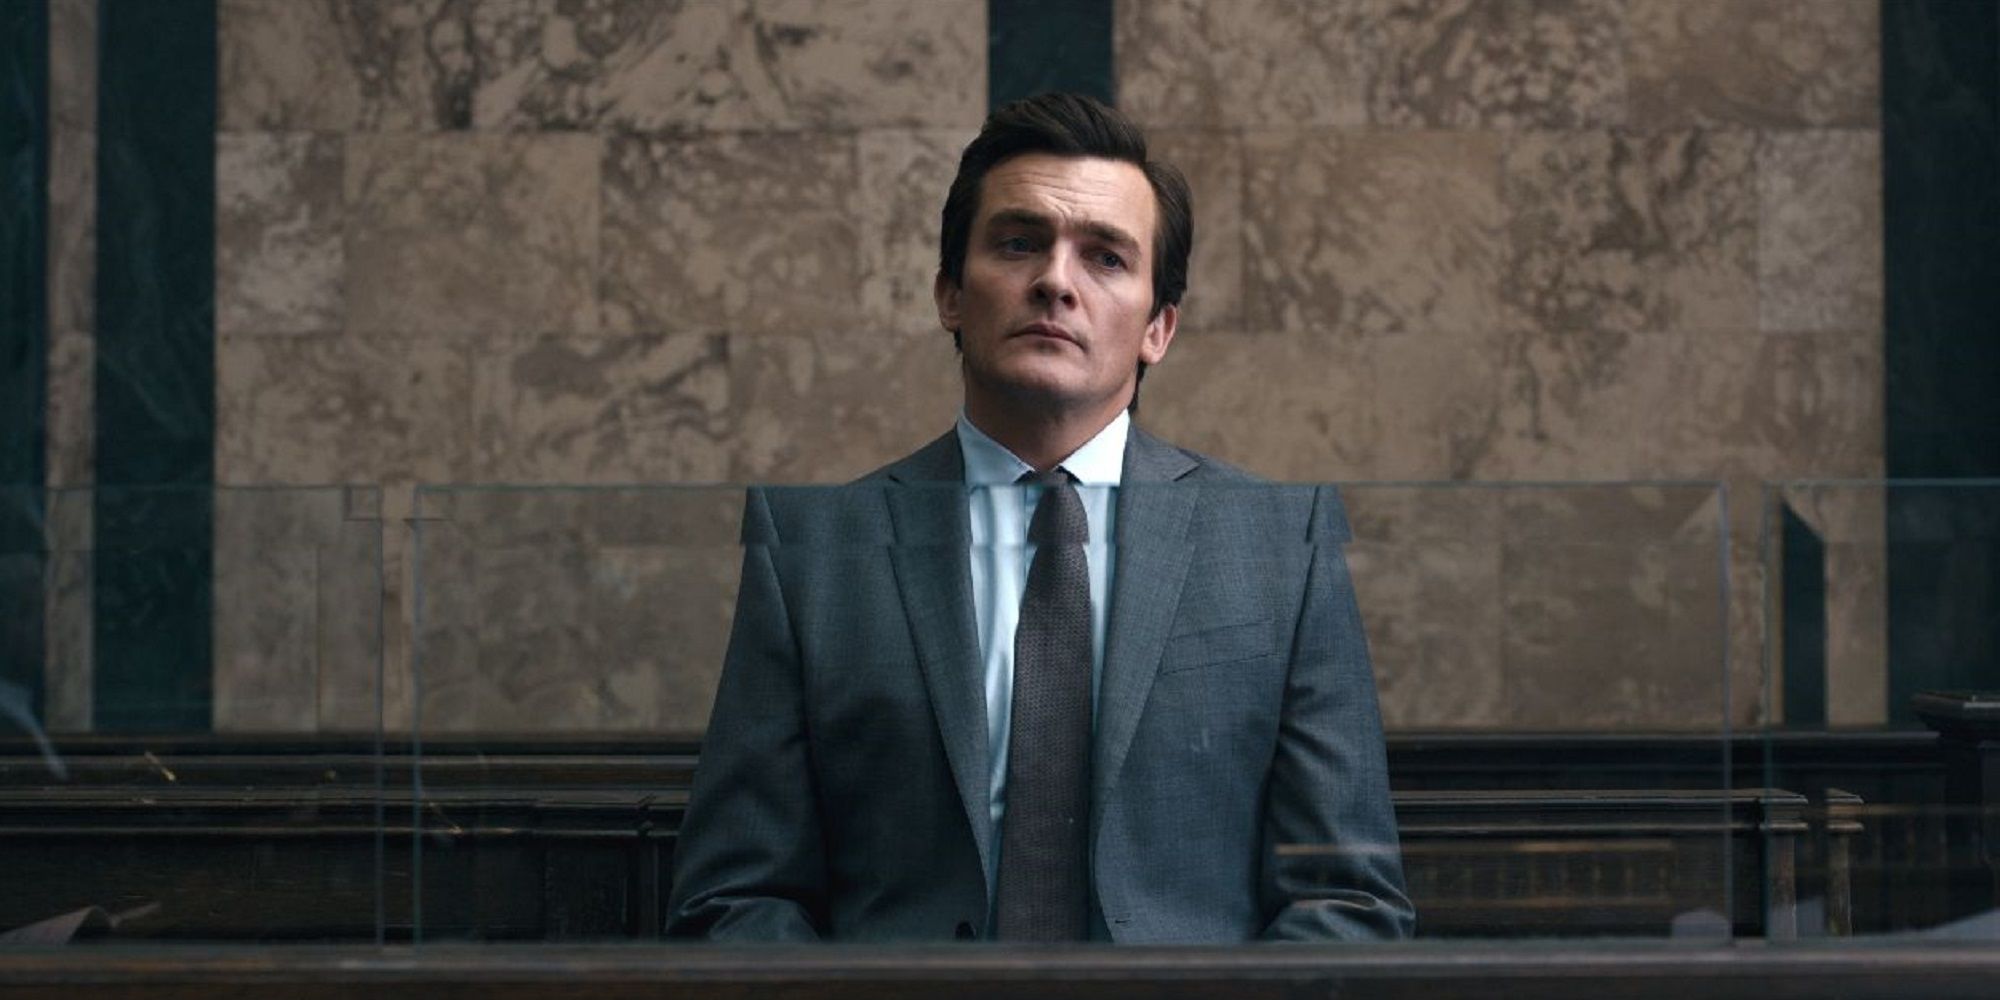 Rupert Friend wearing a suit in a court room in Anatomy of a Scandal